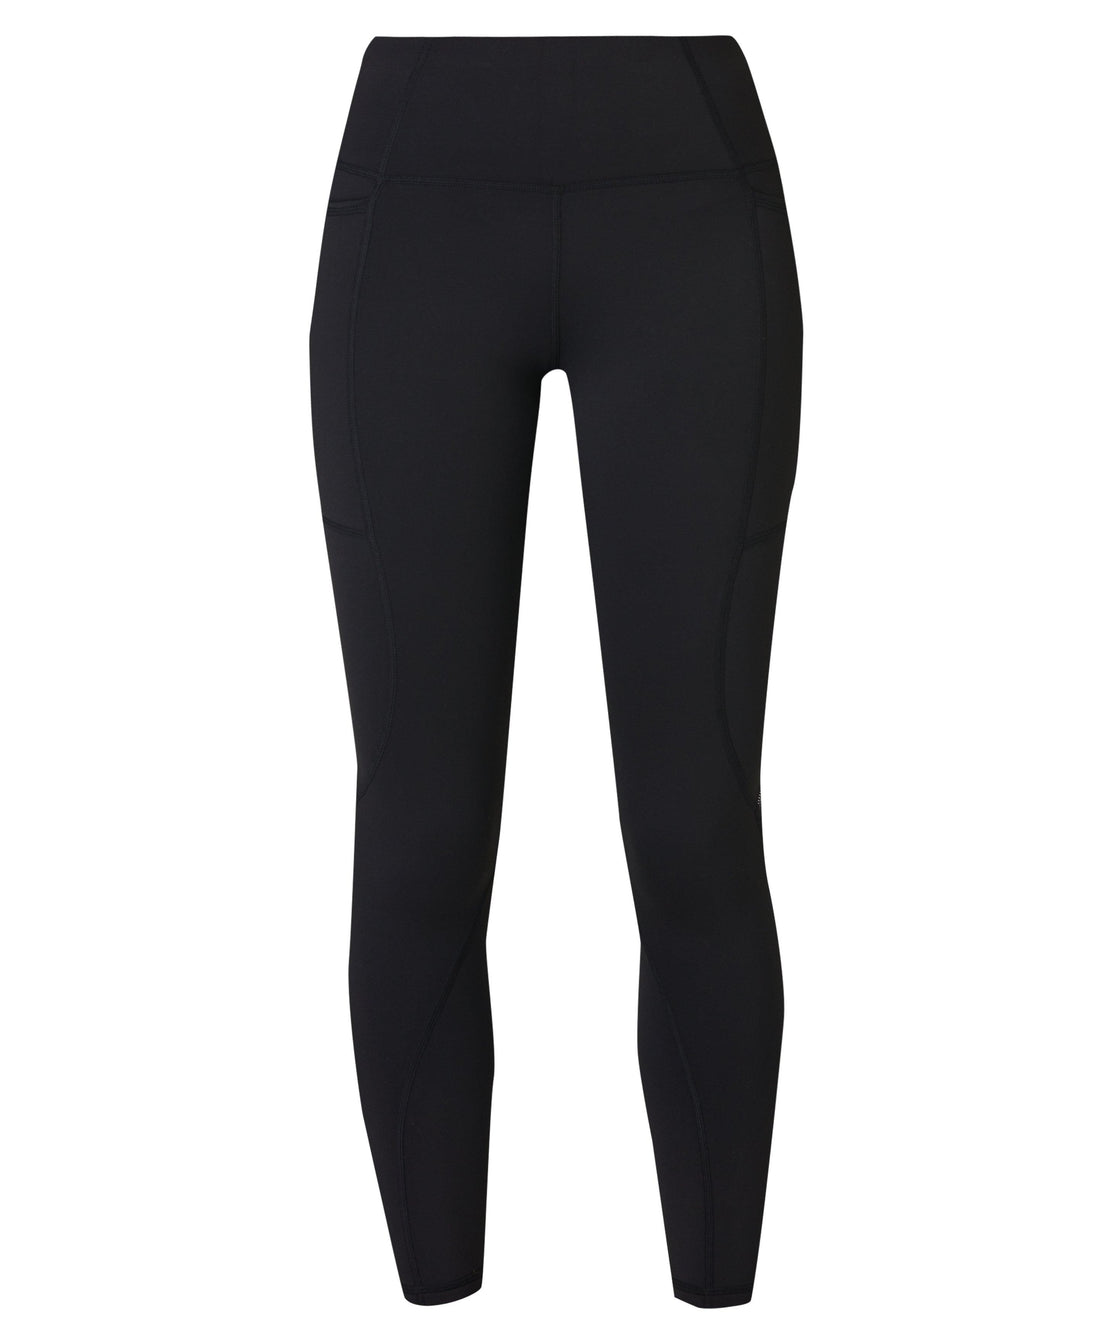 Therma Boost 2.0 7/8 Reflective Running Leggings - Endless Blue